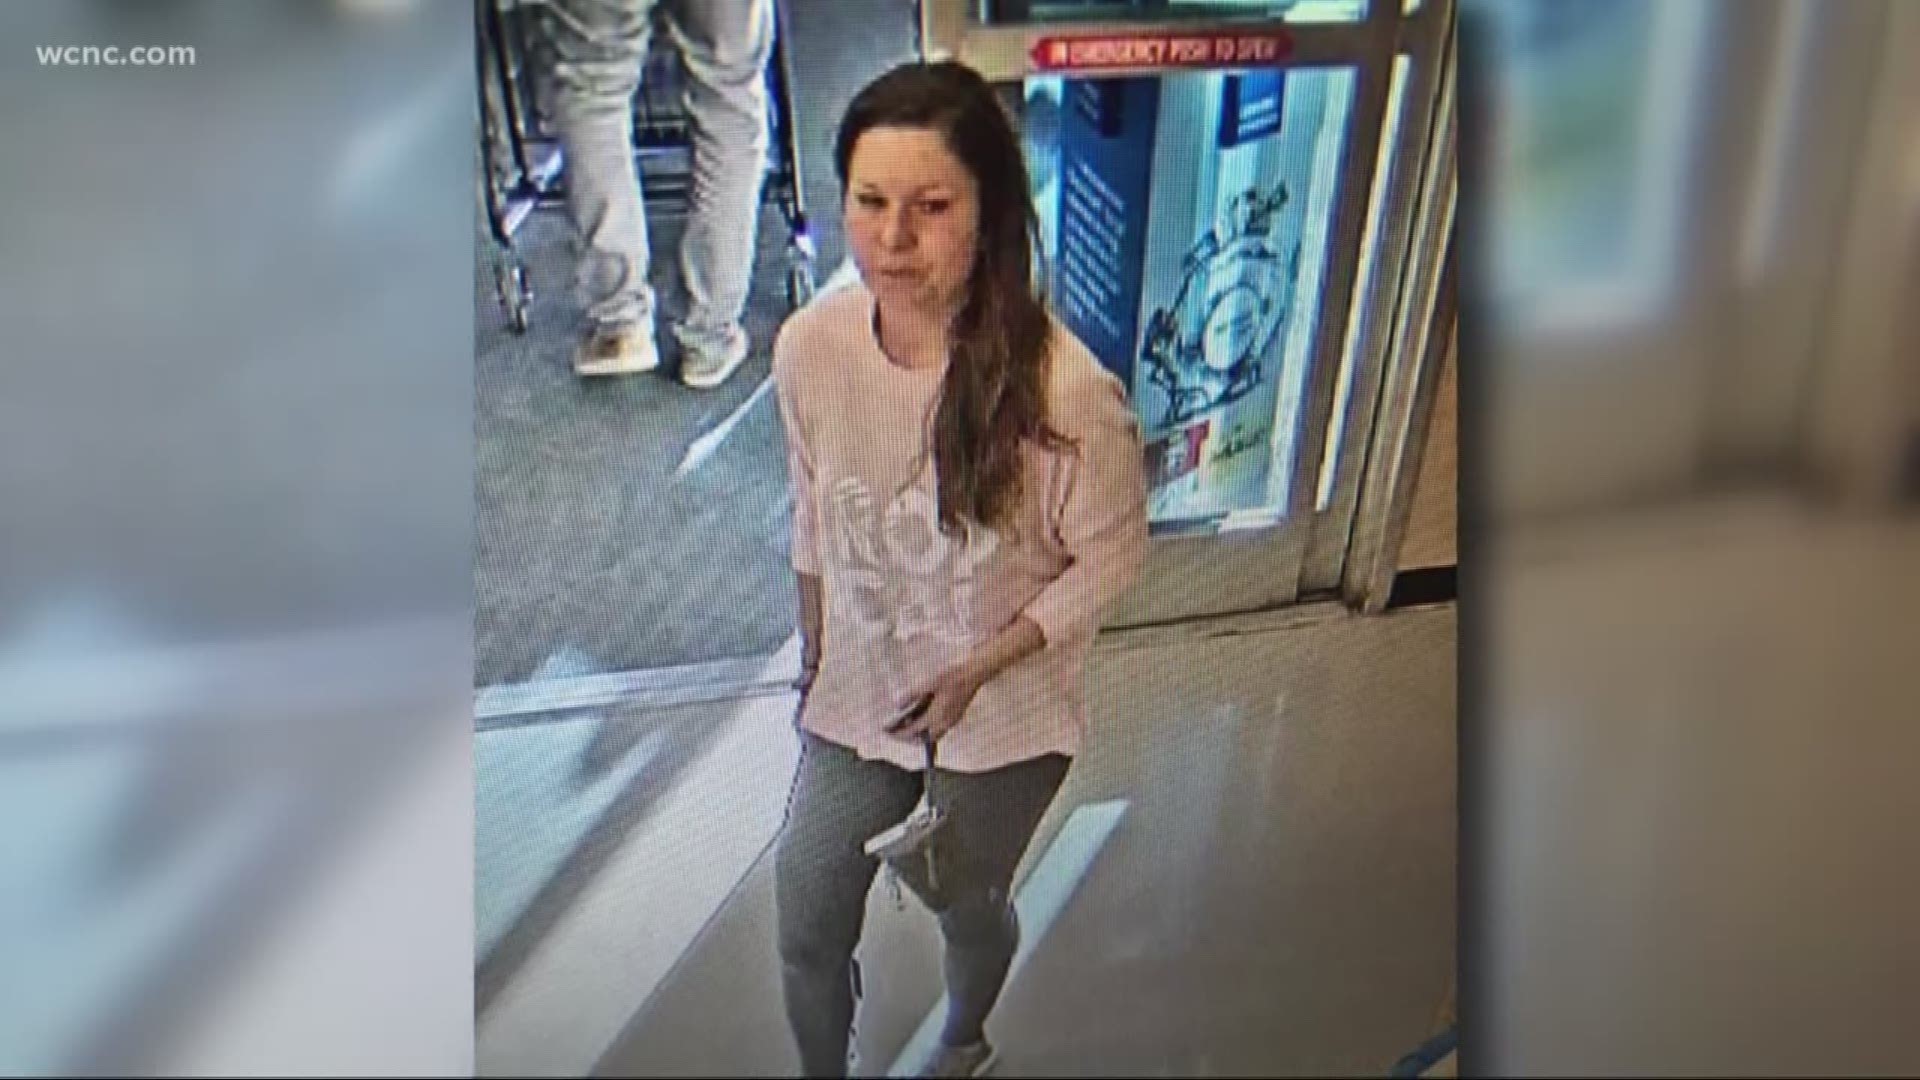 Deputies said surveillance footage at a Food Lion shows the woman purchasing $600 worth of gift cards with the stolen credit cards minutes later.